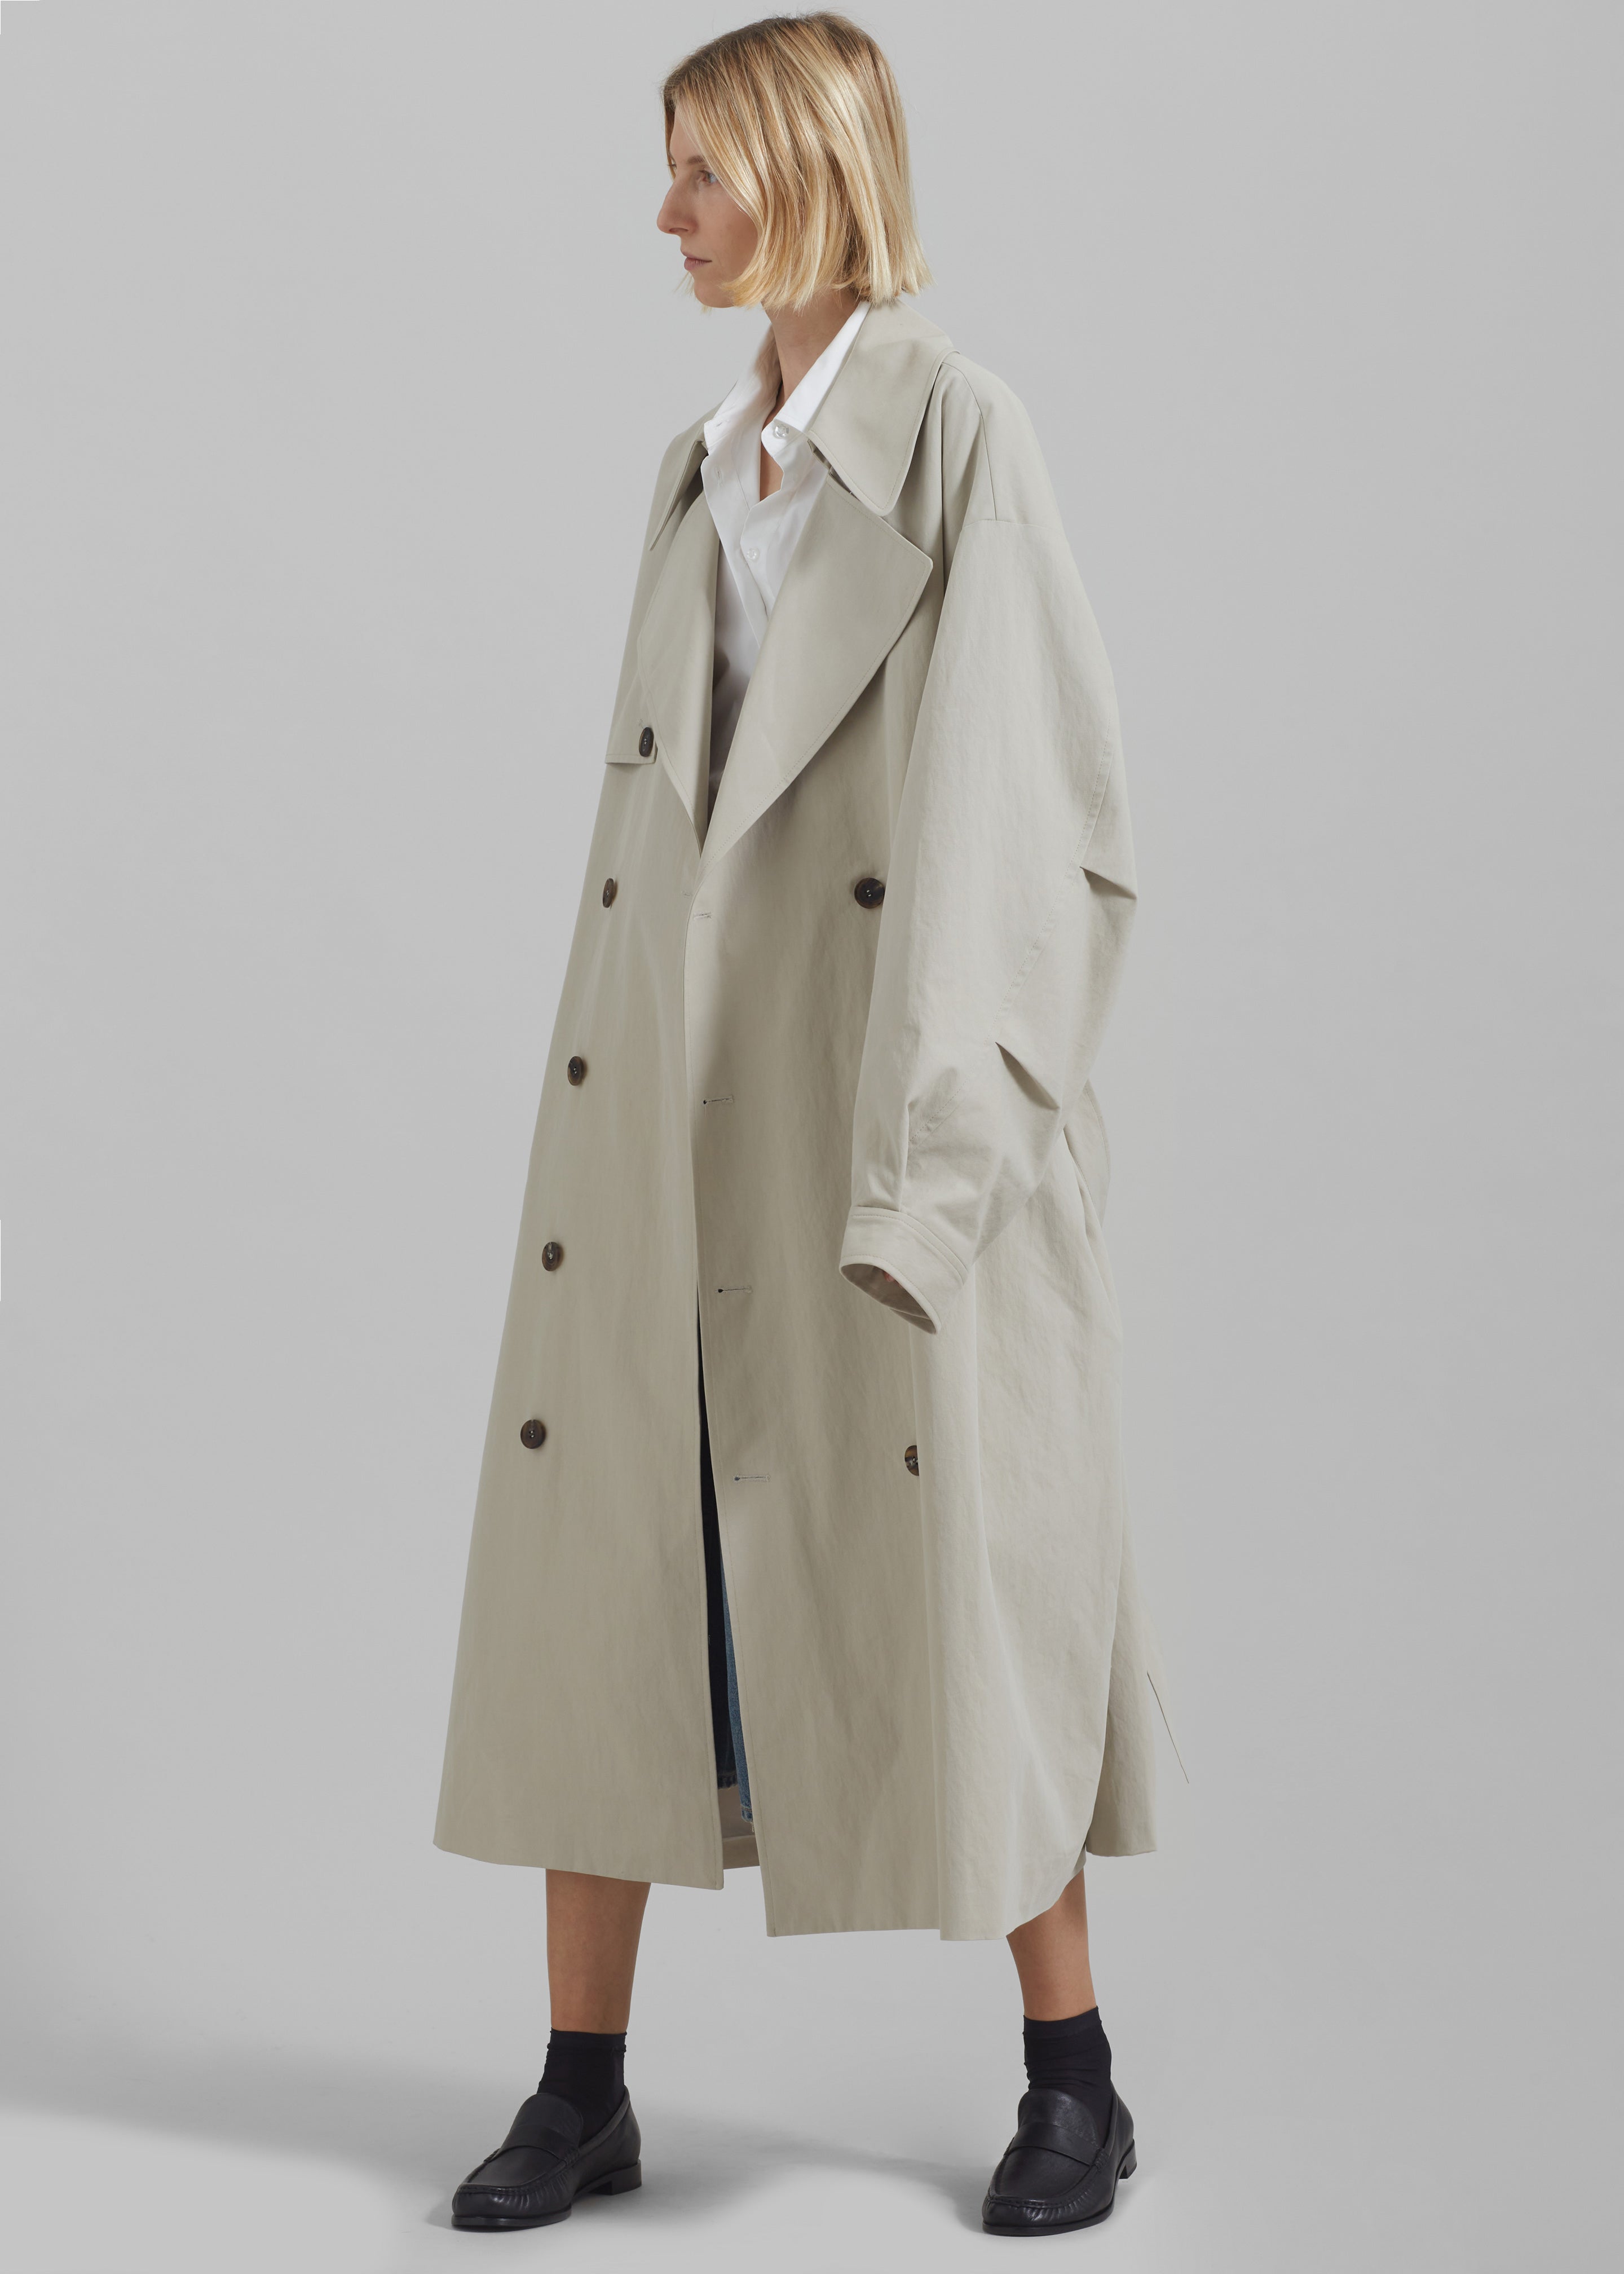 Anika Double Breasted Trench Coat - Beige - 2